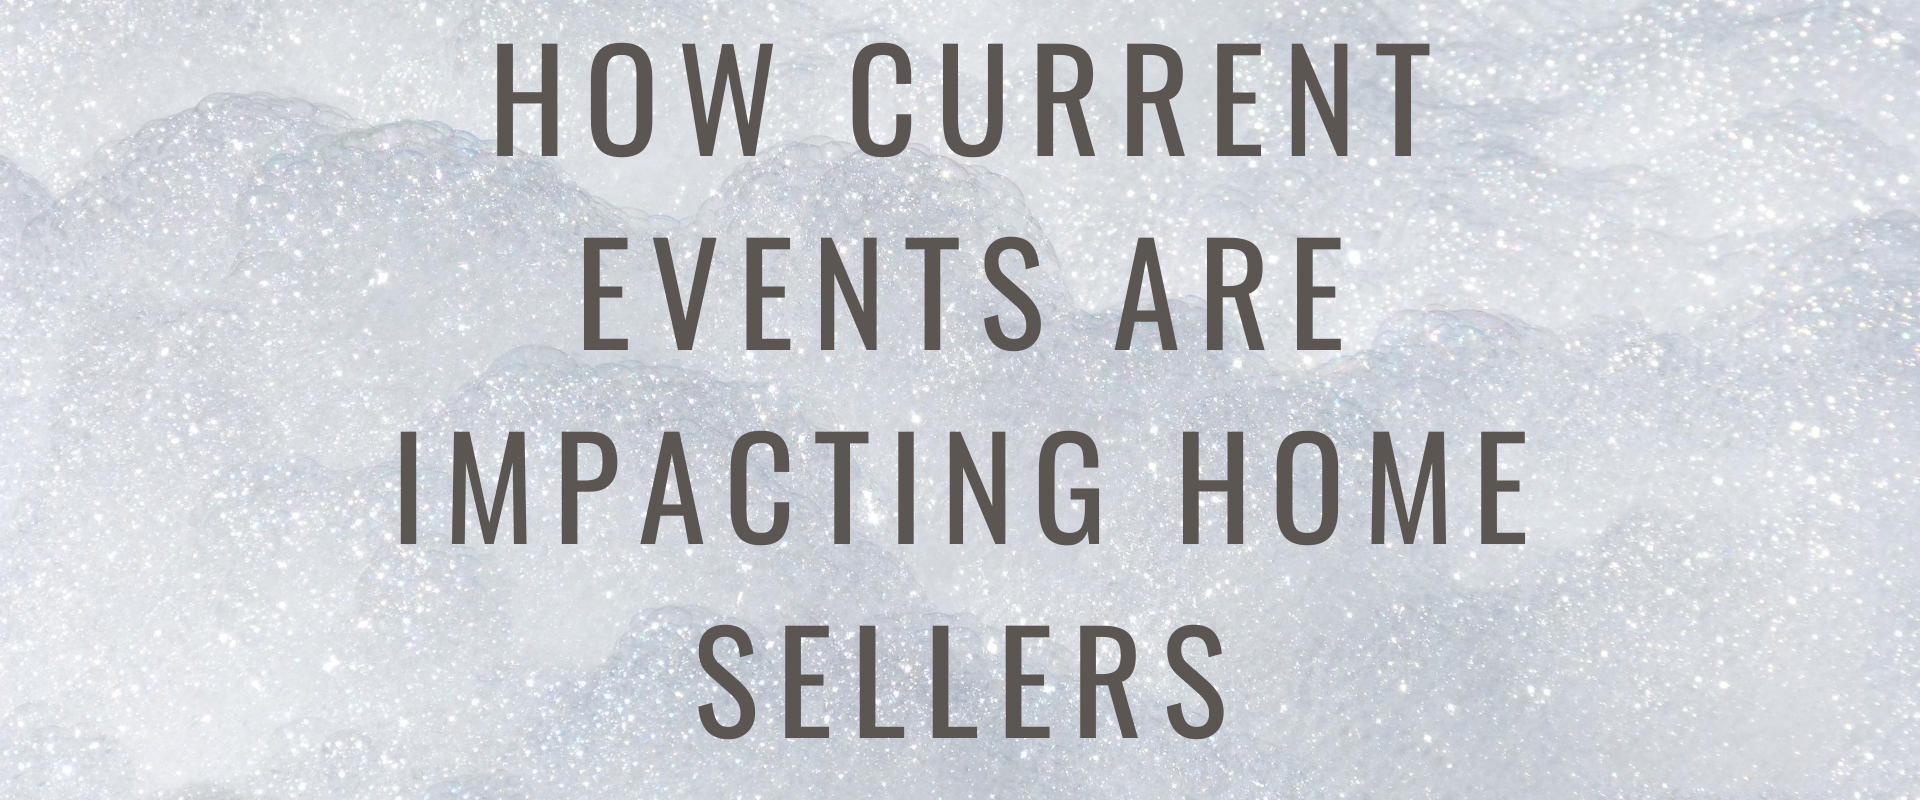 How current events are impacting home sellers